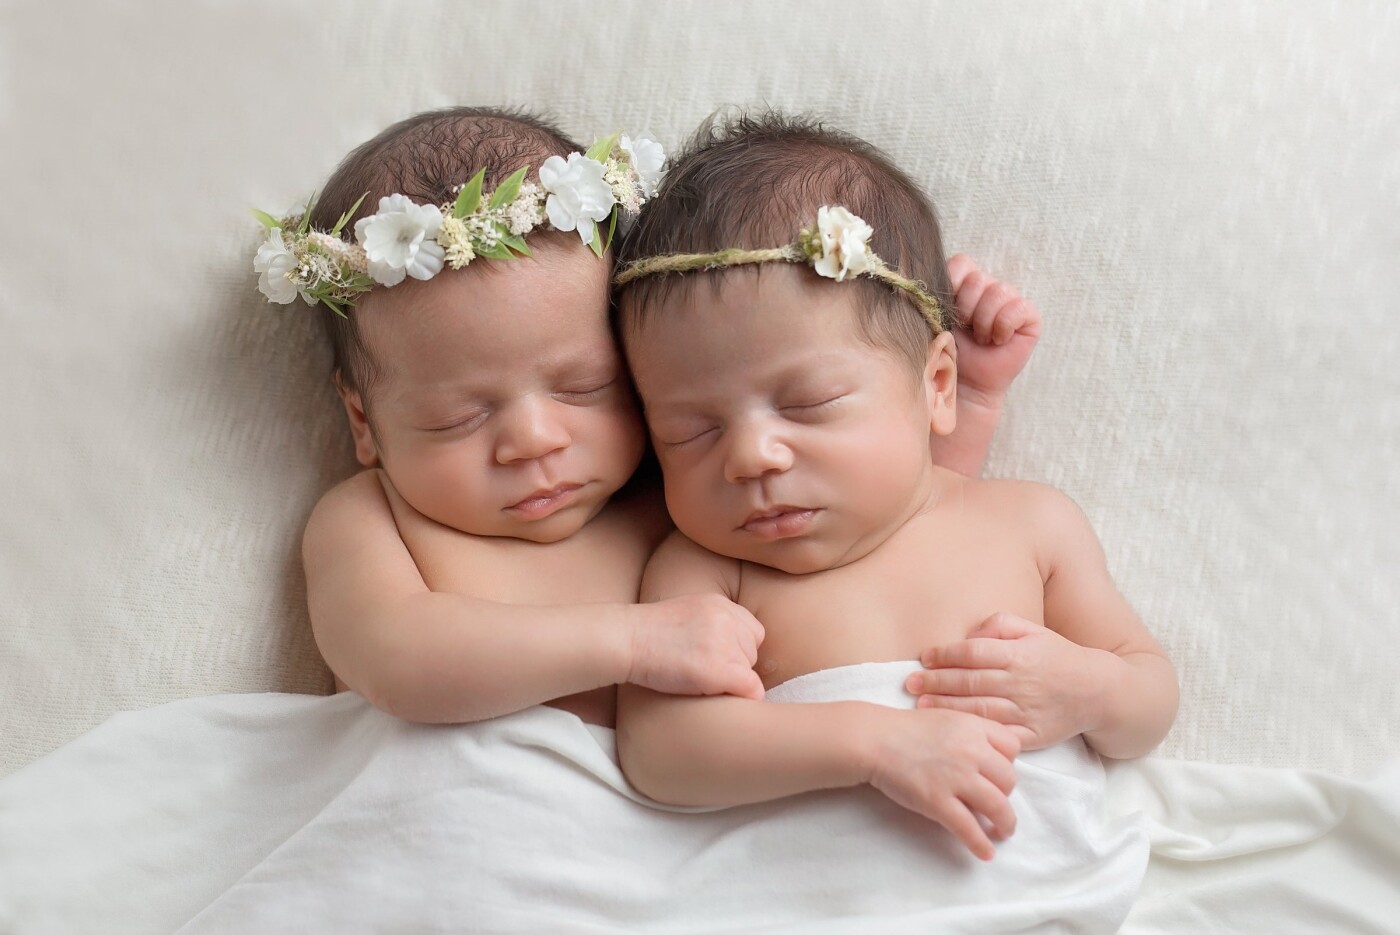 Isabelle & Annabelle. These non identical twins born at 35 weeks were a pleasure to photograph at 26 days old. This was one of the first few shots I took of them when they arrived in my studio.